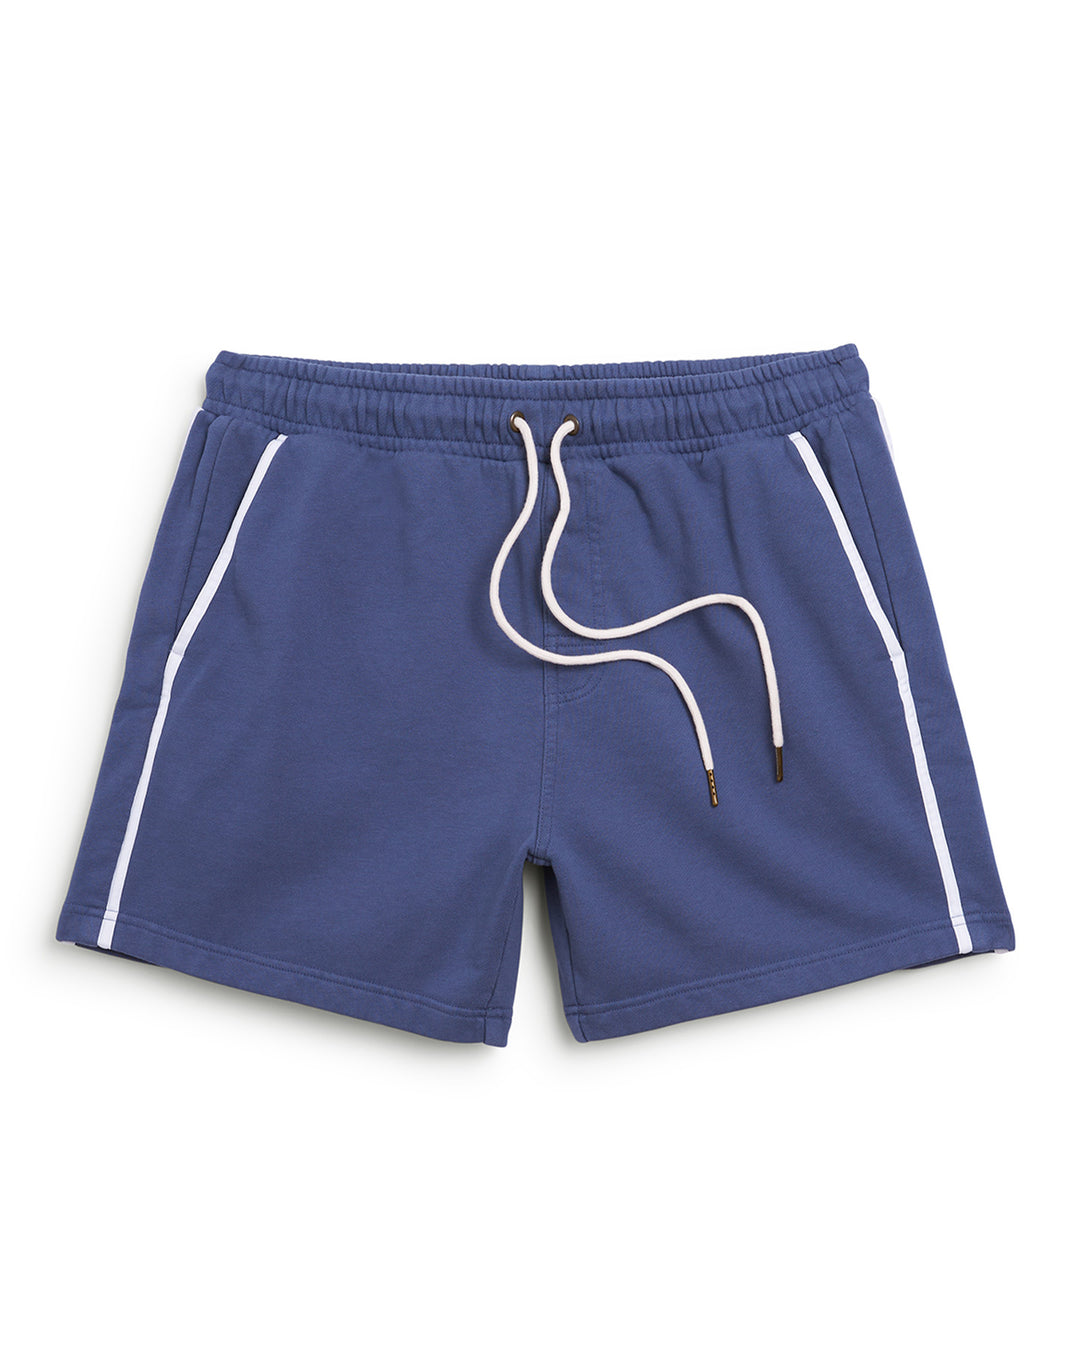 The Moontide Marseille Short is a pair of men's blue swim shorts with white piping and a drawstring trainer.